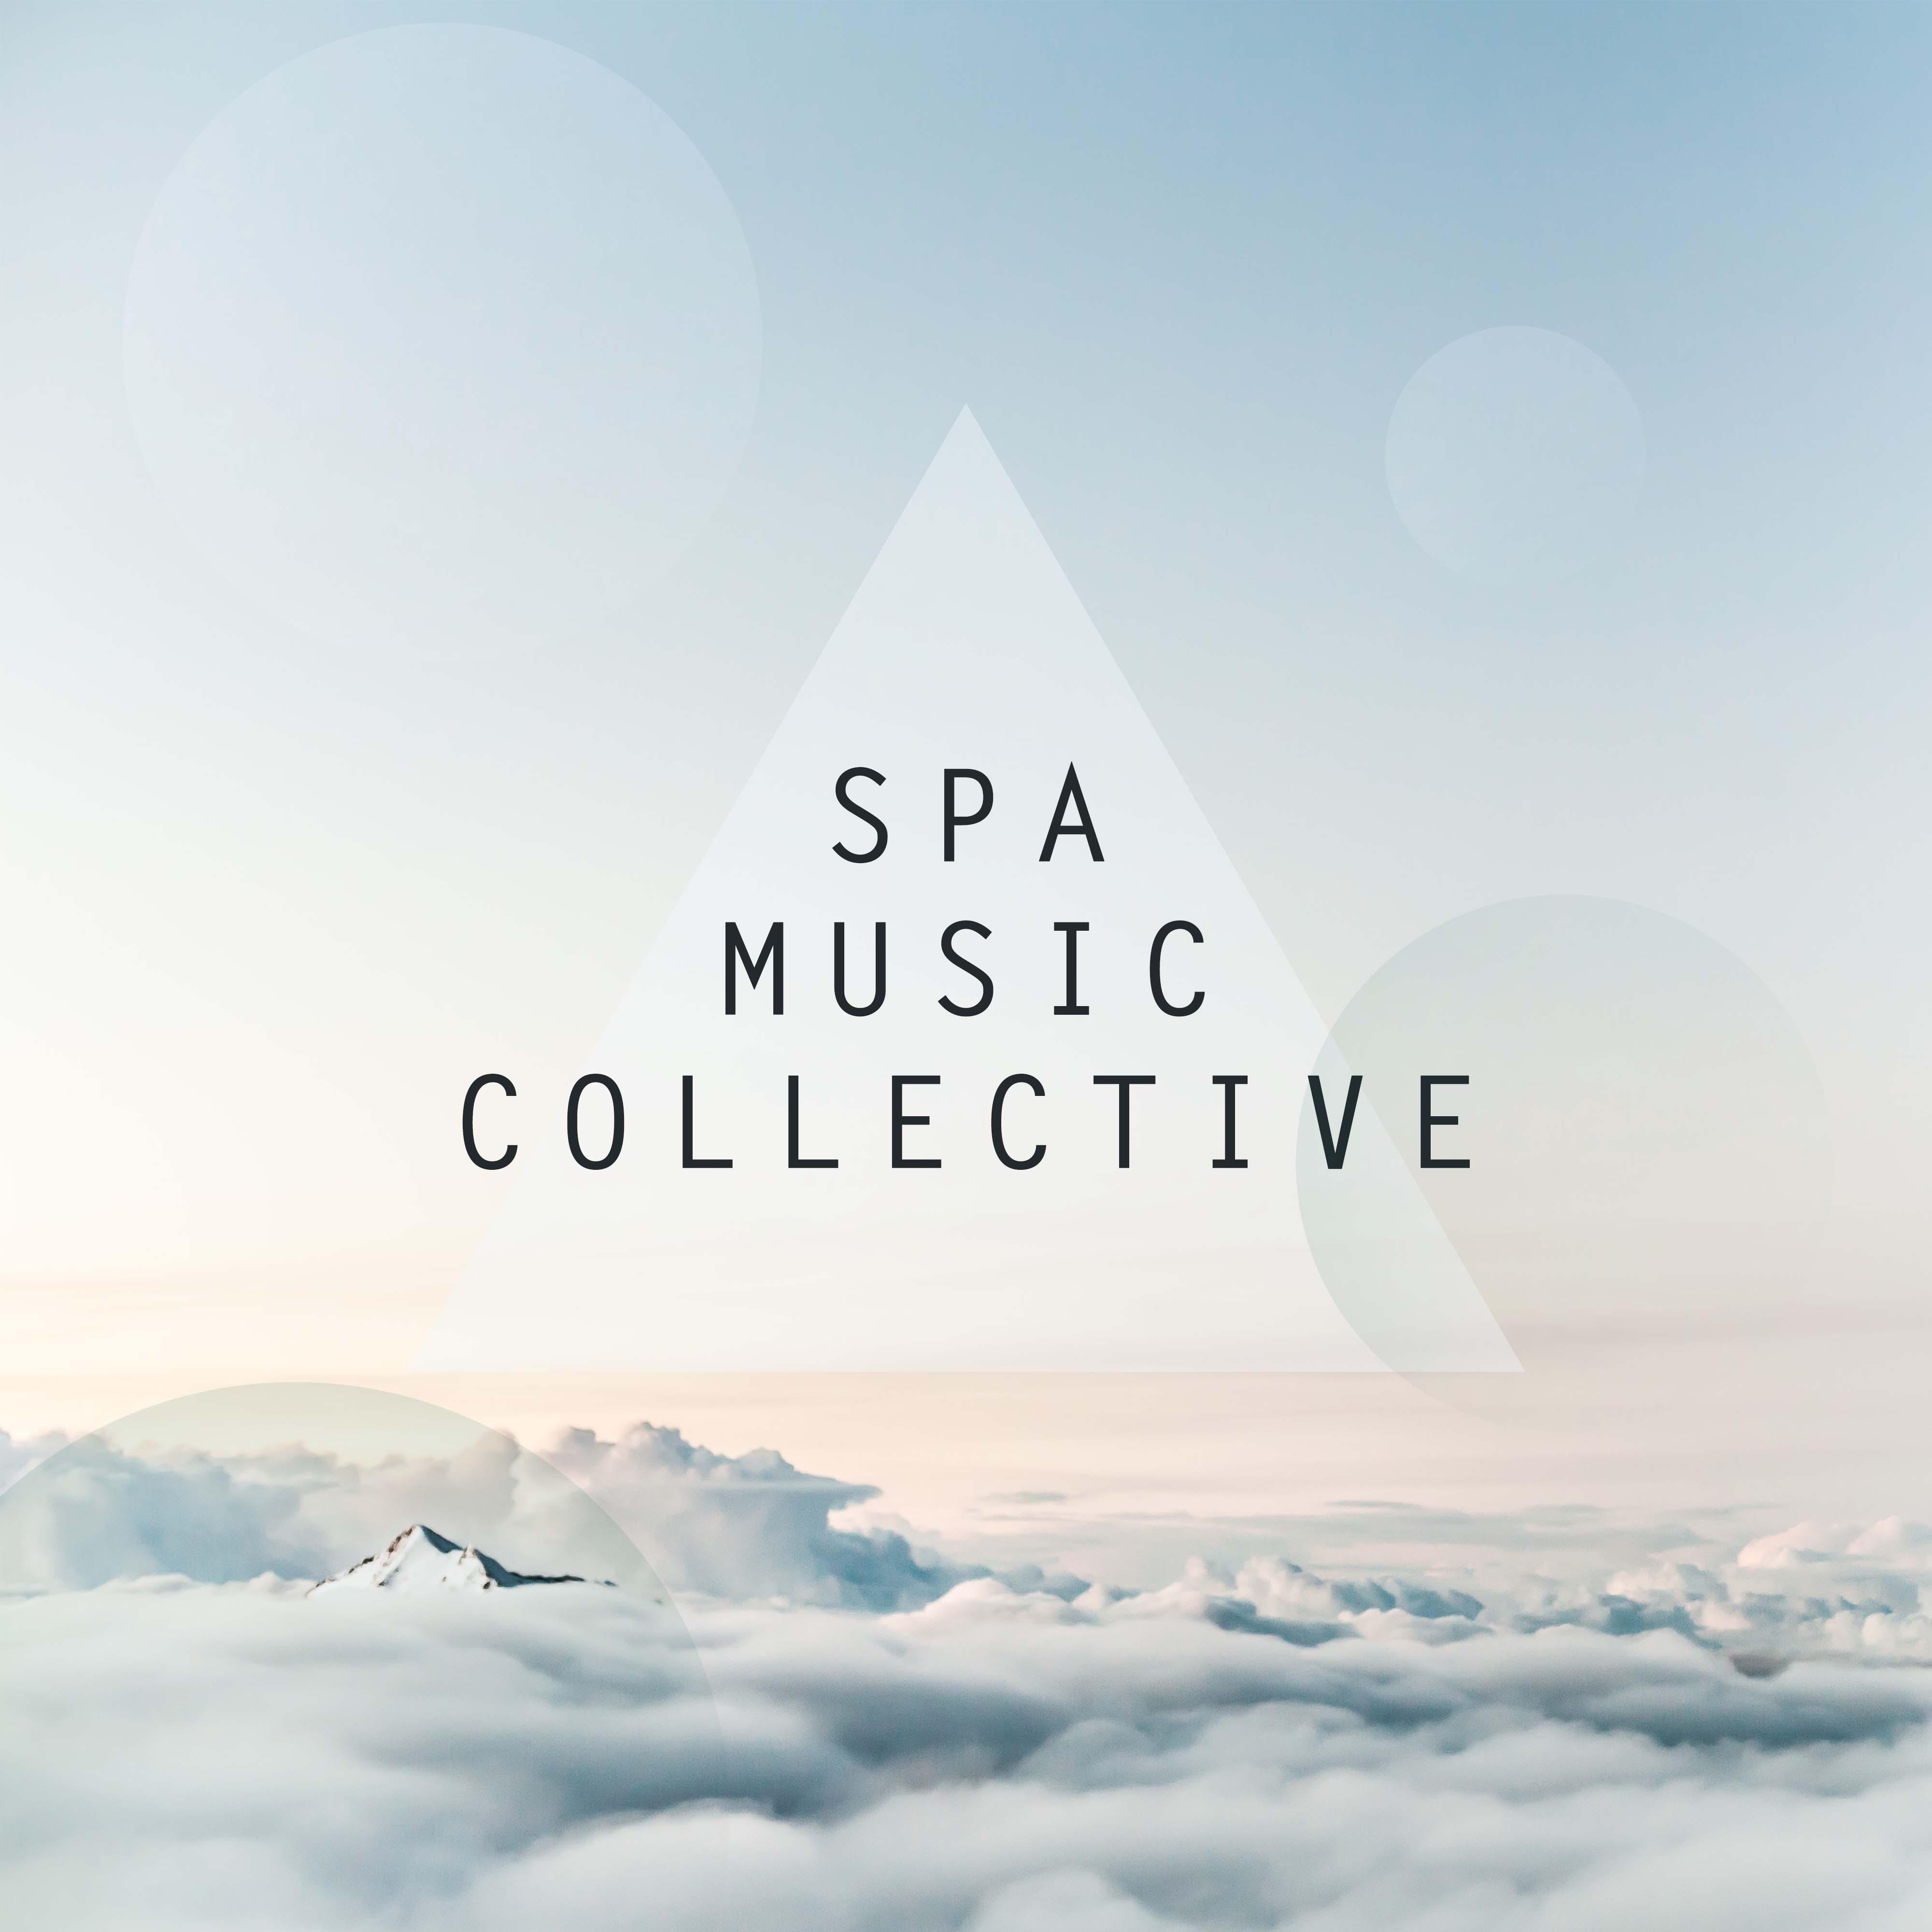 Spa Music Collective - Sit Back and Enjoy the Most Relaxing Music on Earth